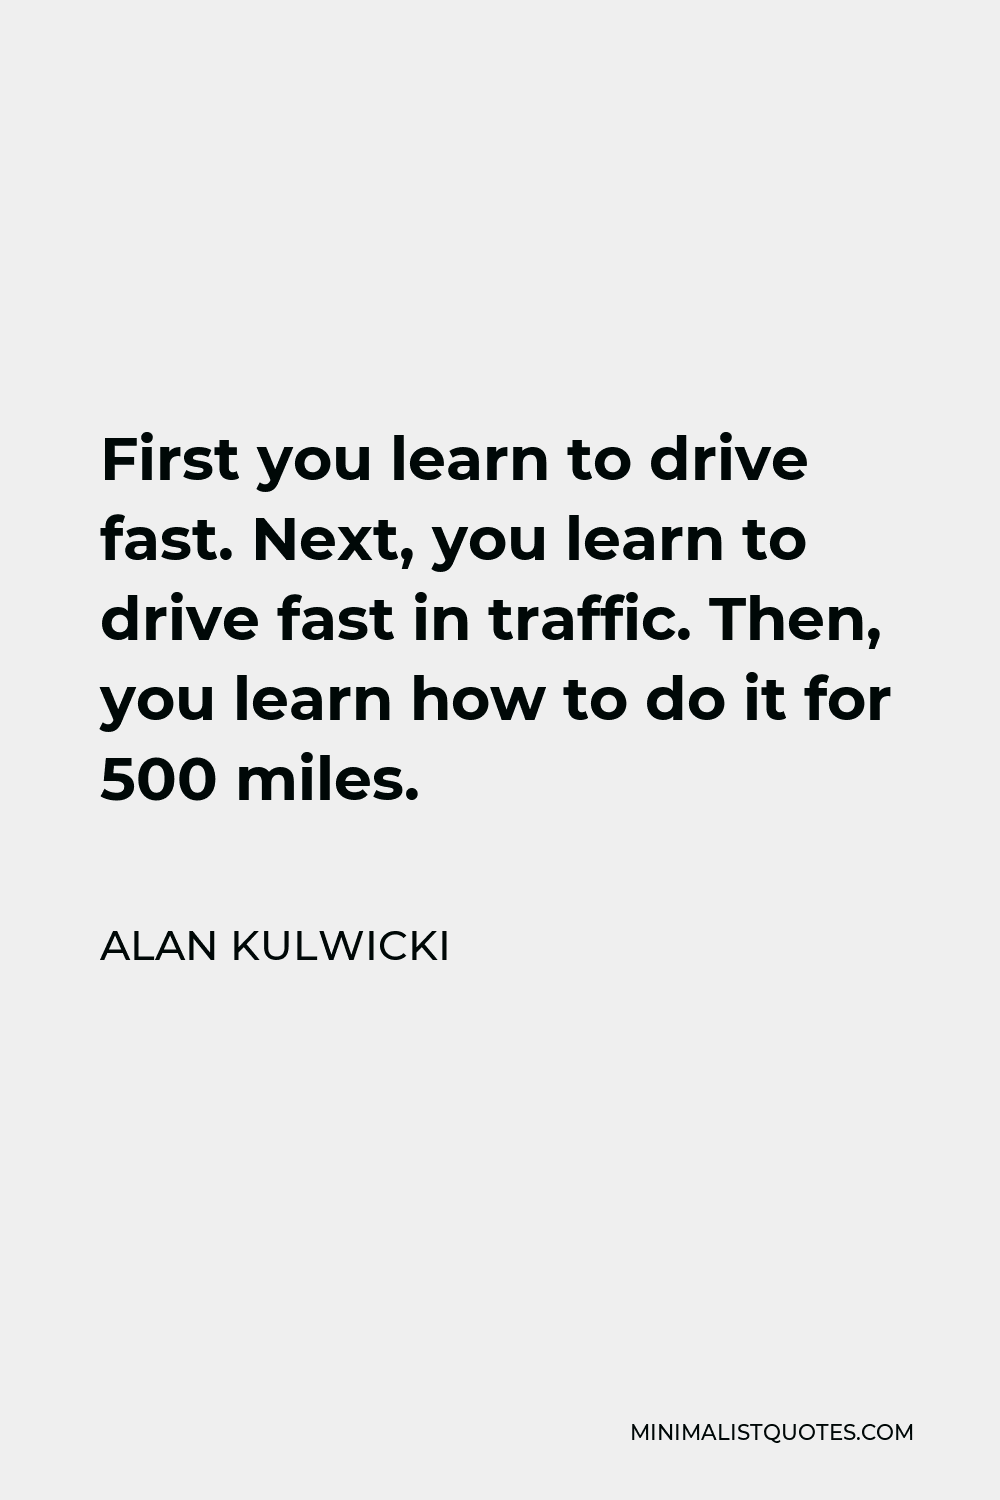 Alan Kulwicki Quote - First you learn to drive fast. Next, you learn to drive fast in traffic. Then, you learn how to do it for 500 miles.